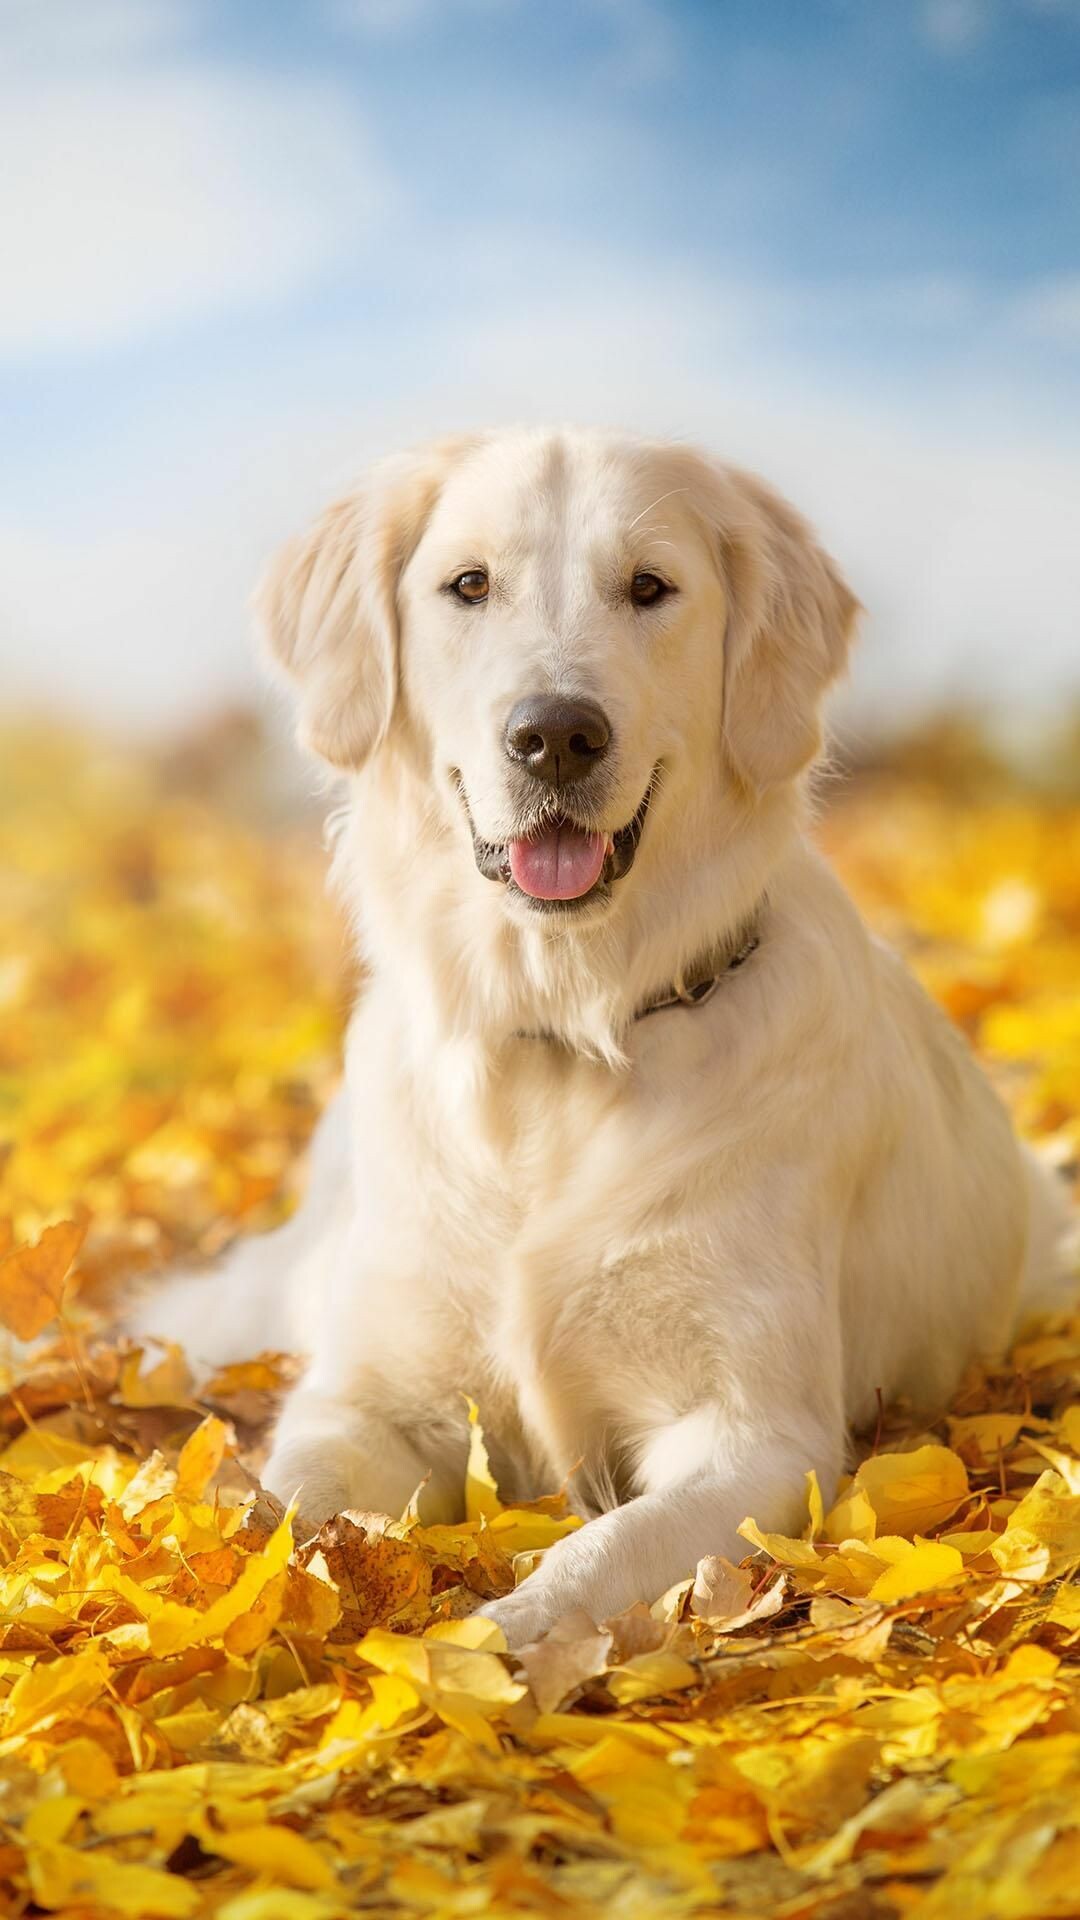 Labrador lovers' paradise, Wide selection of wallpapers, Showcasing the breed, Joy and happiness, 1080x1920 Full HD Phone